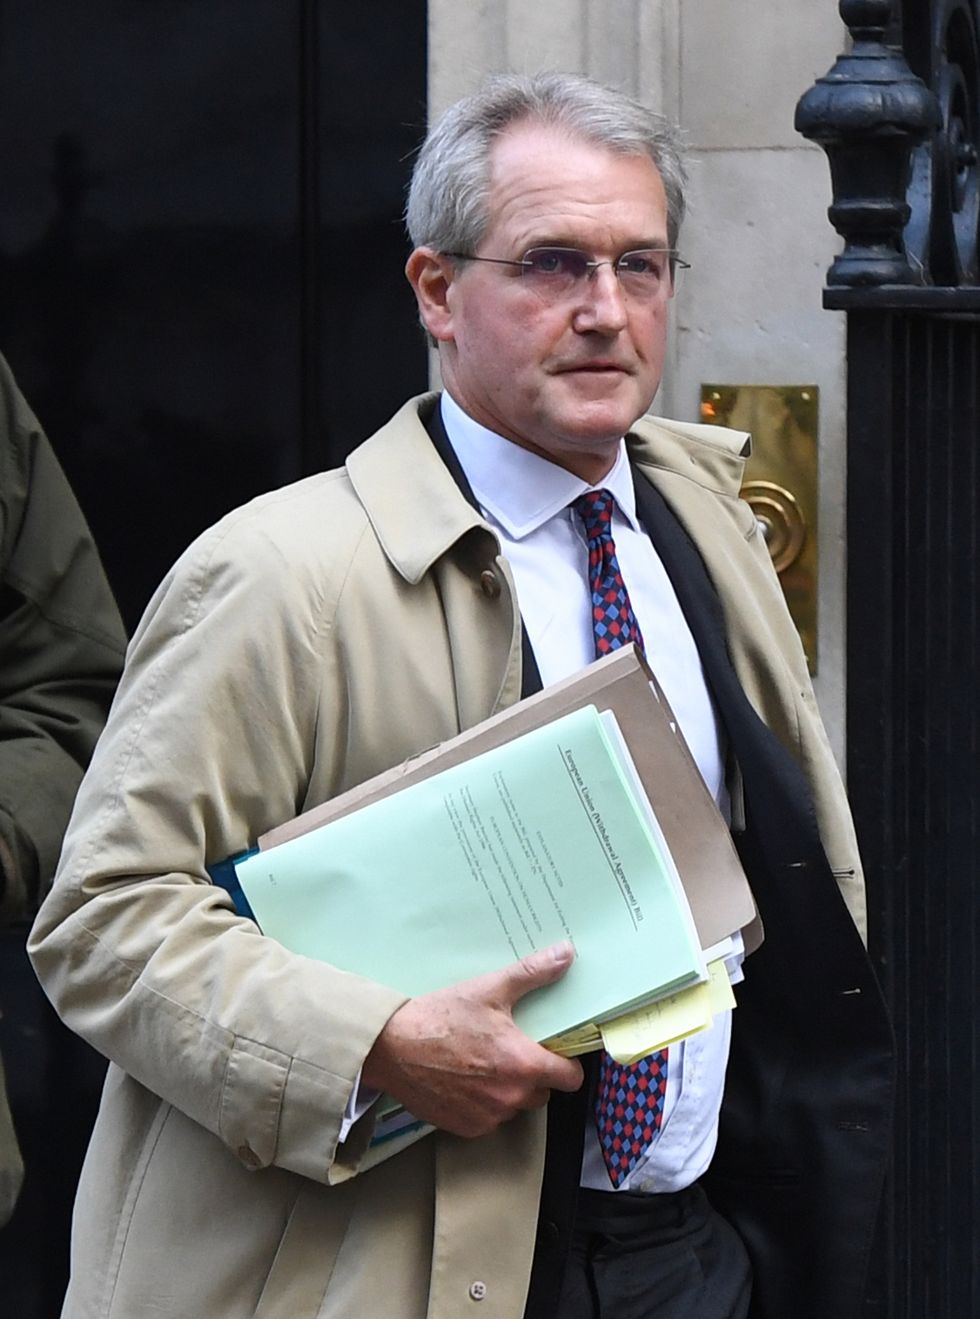 Conservative MP for North Shropshire, Owen Paterson, who was found to have committed an "egregious" breach of standards rules as he lobbied ministers and officials for two companies paying him more than 100,000 per year.